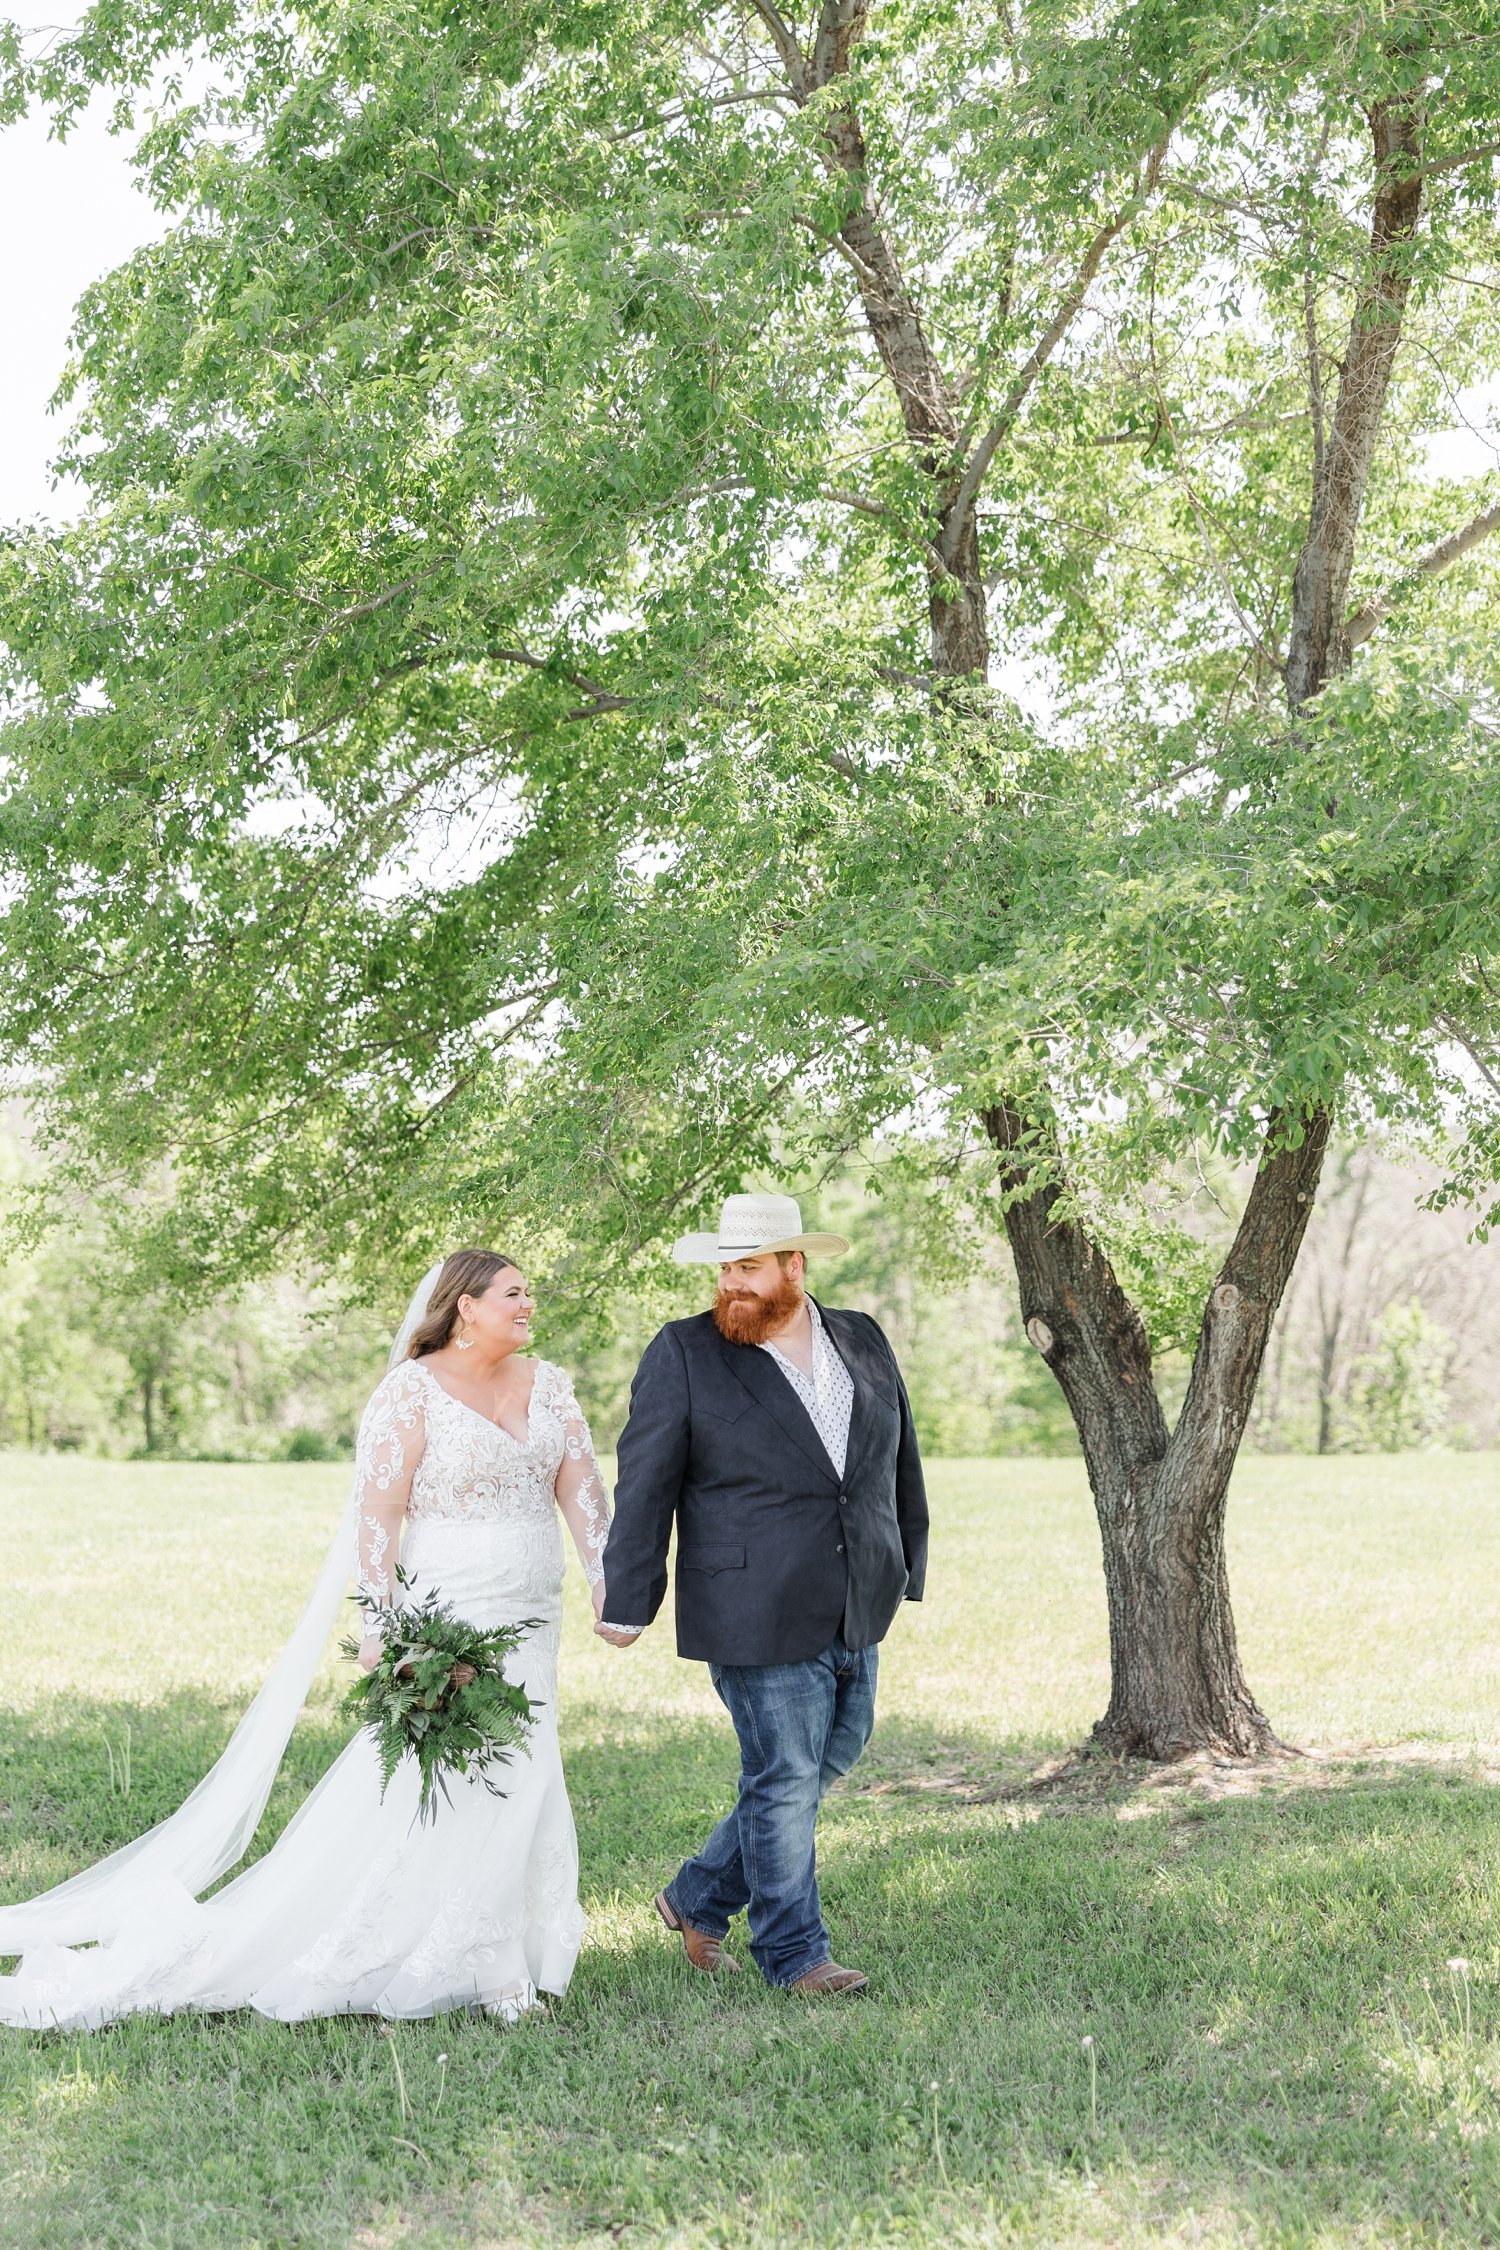 Trent leads his new bride, Neely, as they walk under a beautiful tree at Lizard Creek Ranch in Fort Dodge, IA | CB Studio